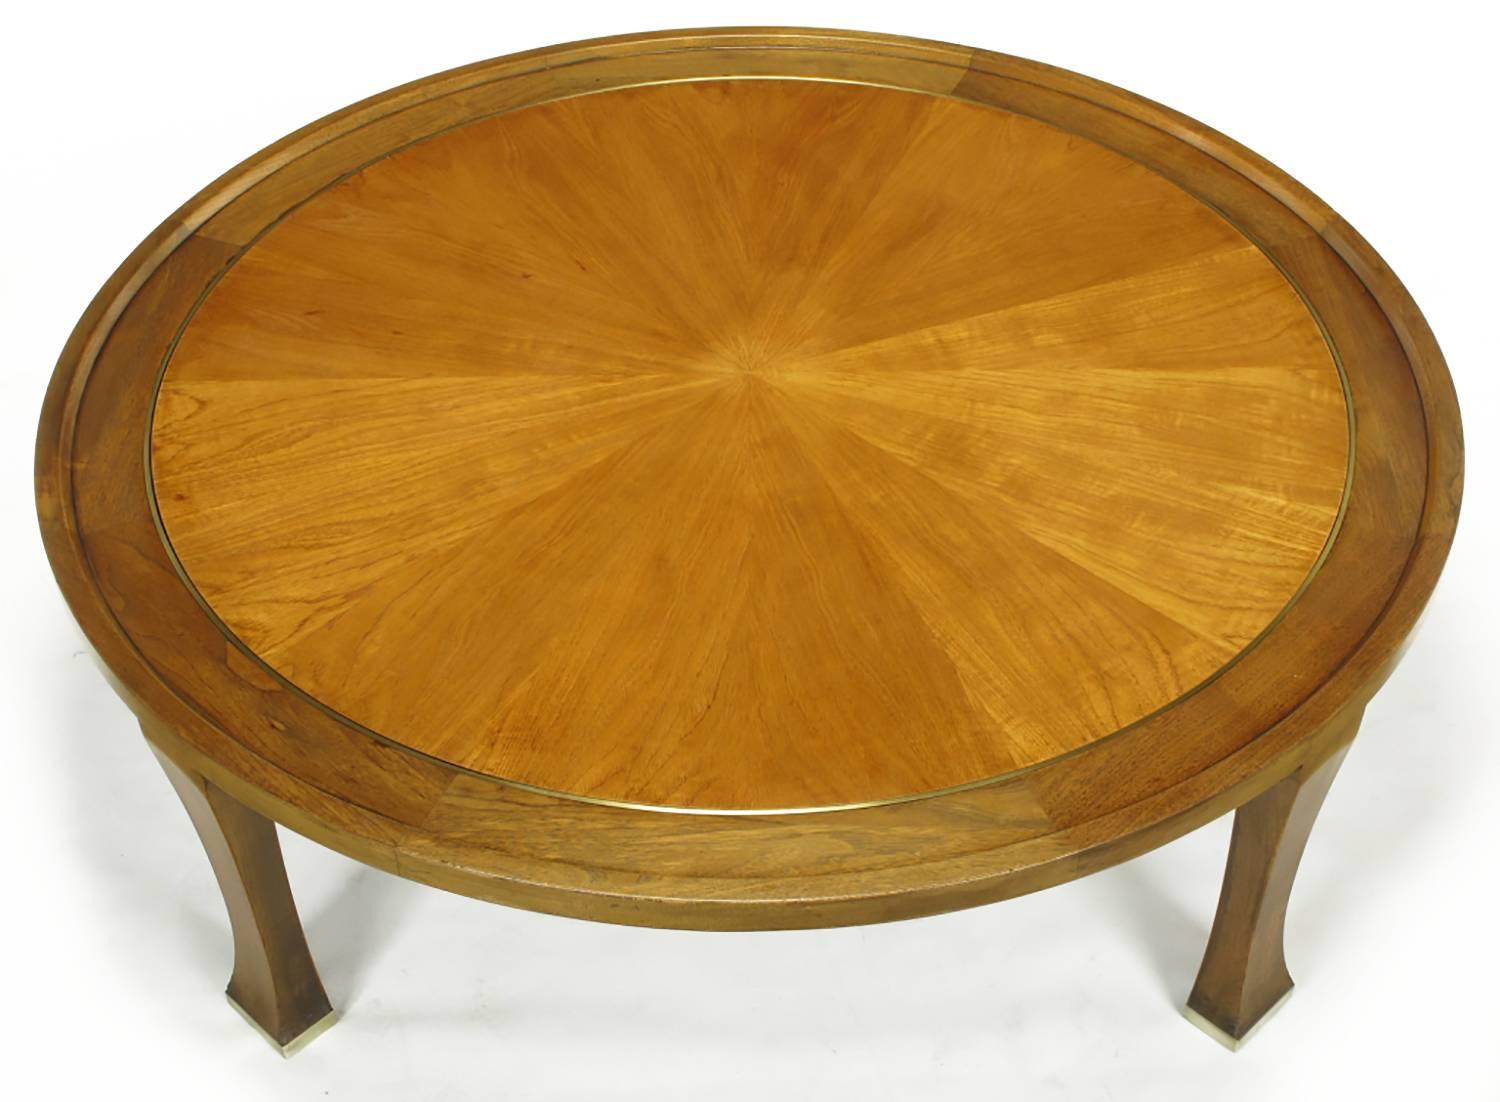 Round parquetry top coffee table designed for Baker Furniture. Unusual styling with tapered legs that widen at the brass capped foot. Round top is comprised of a tapered mahogany frame with a lipped outer edge. Brass banded inset detail separates